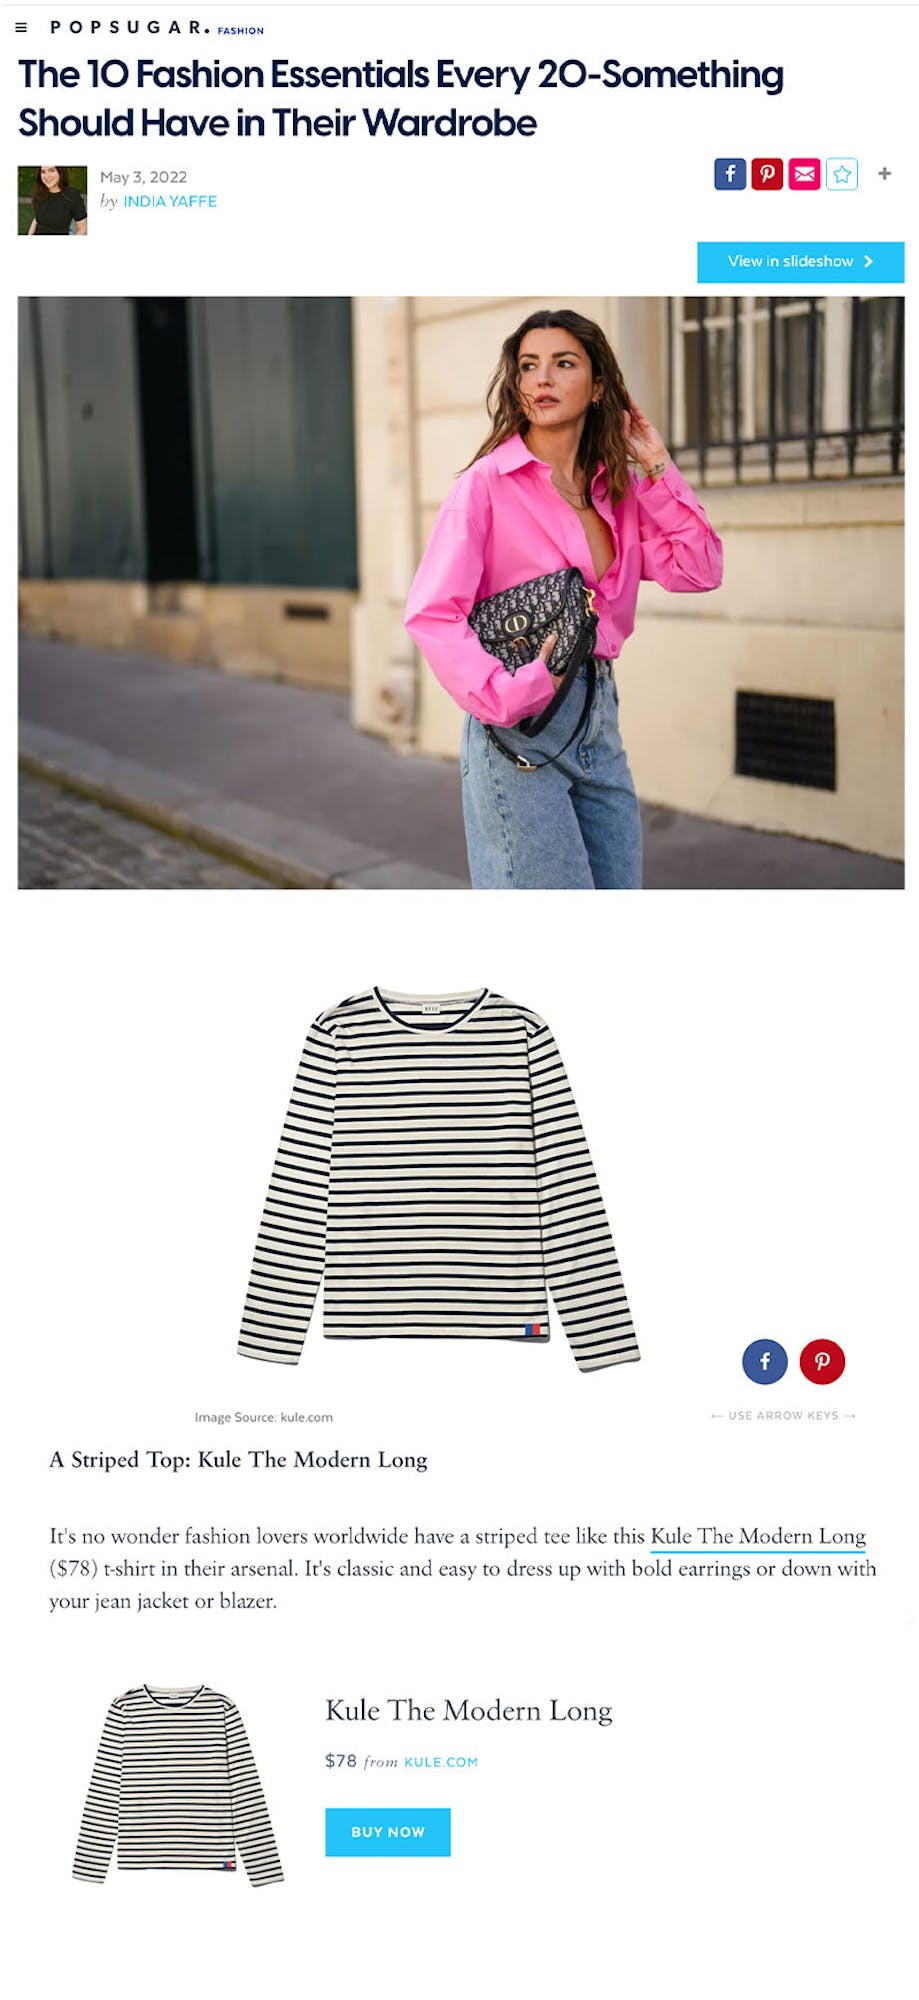 popsugar featuring kule clothing for women in their 20s